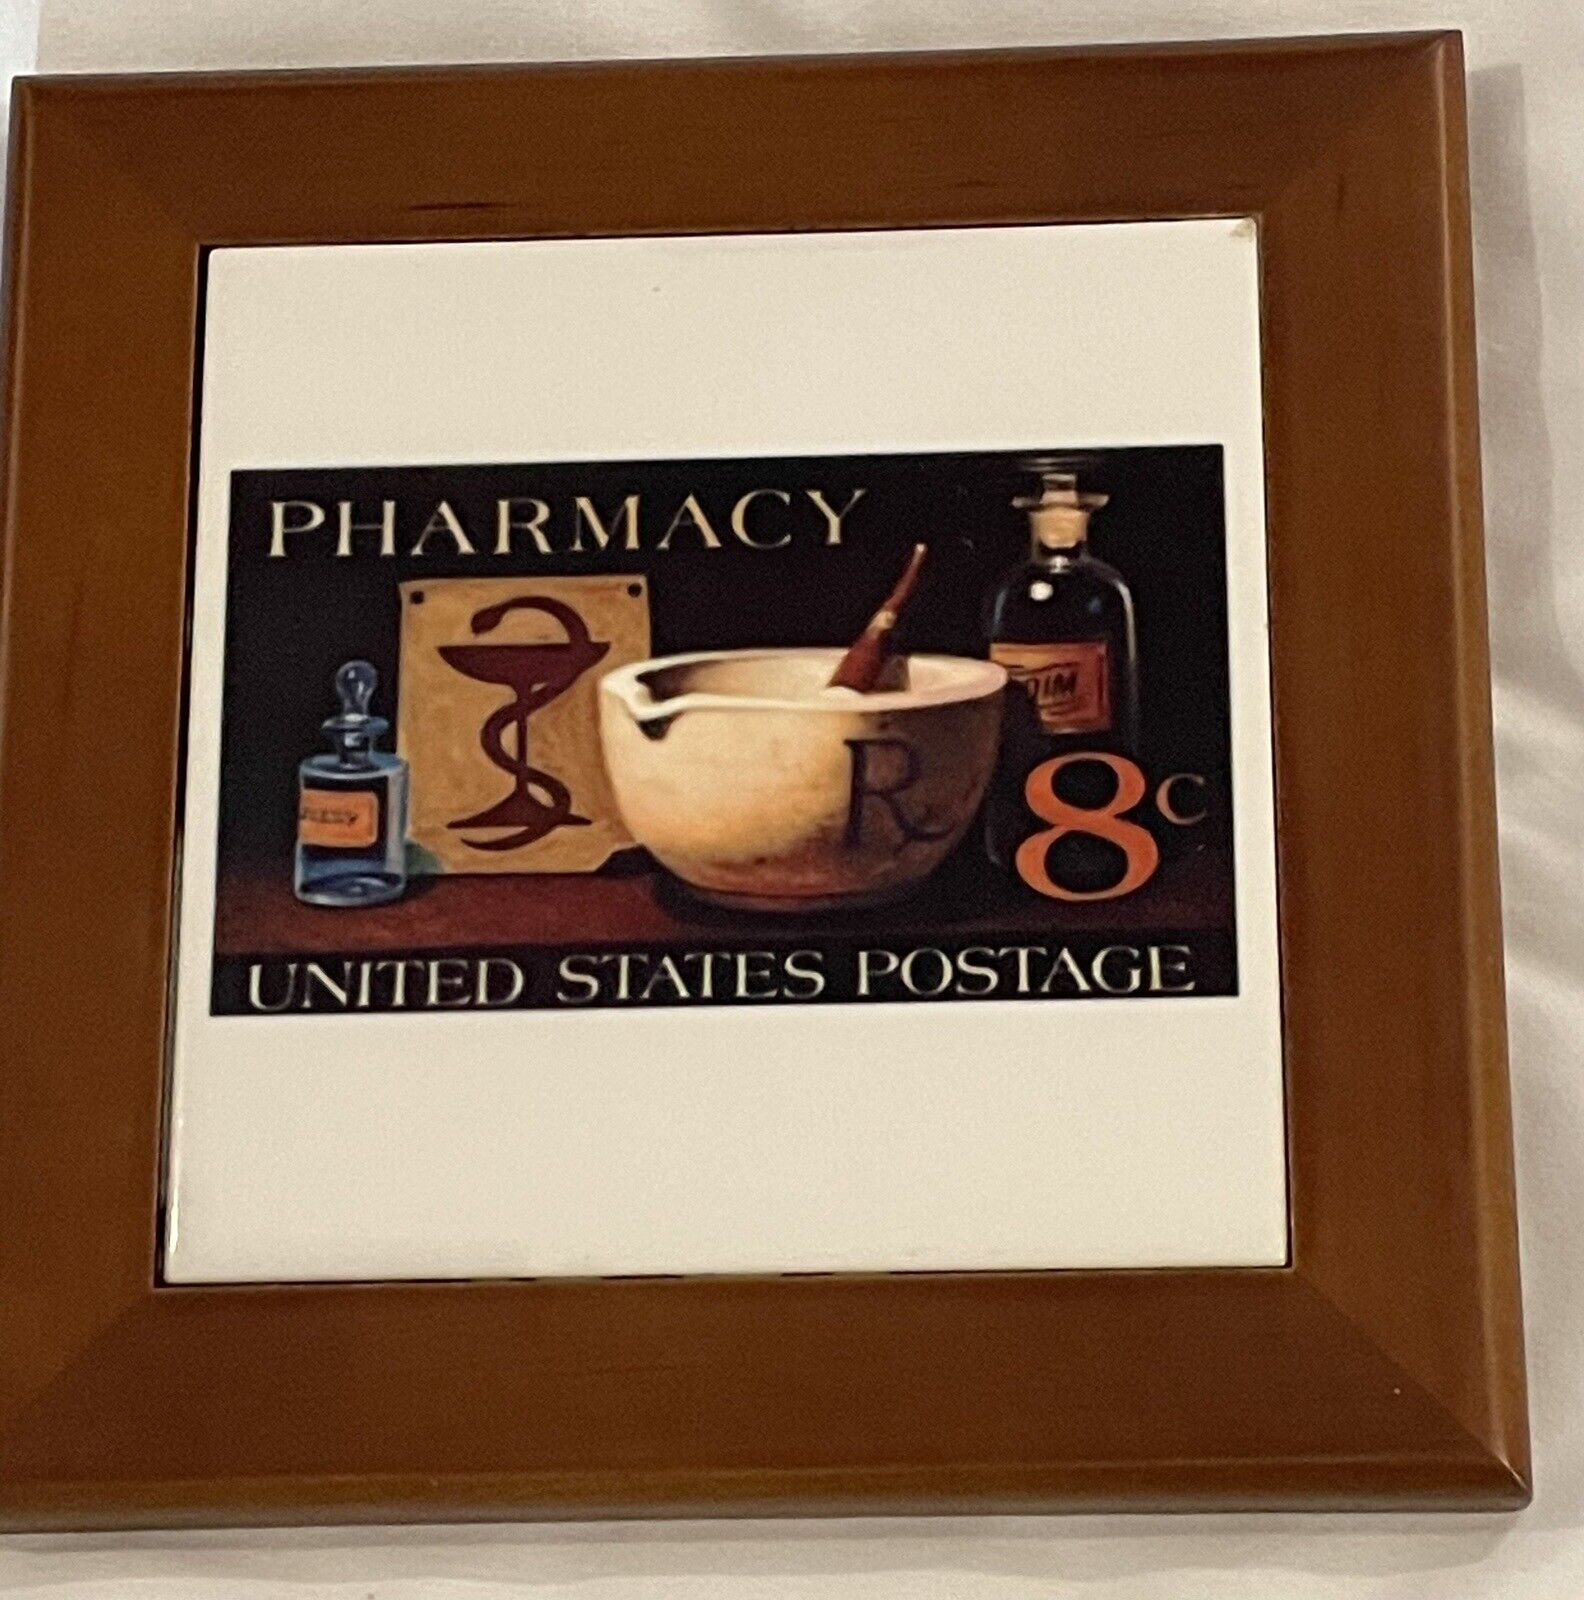 Pharmacy Decor 8 Cent Stamp  Pharmacist Wooden Wall ART Plaque US Postage